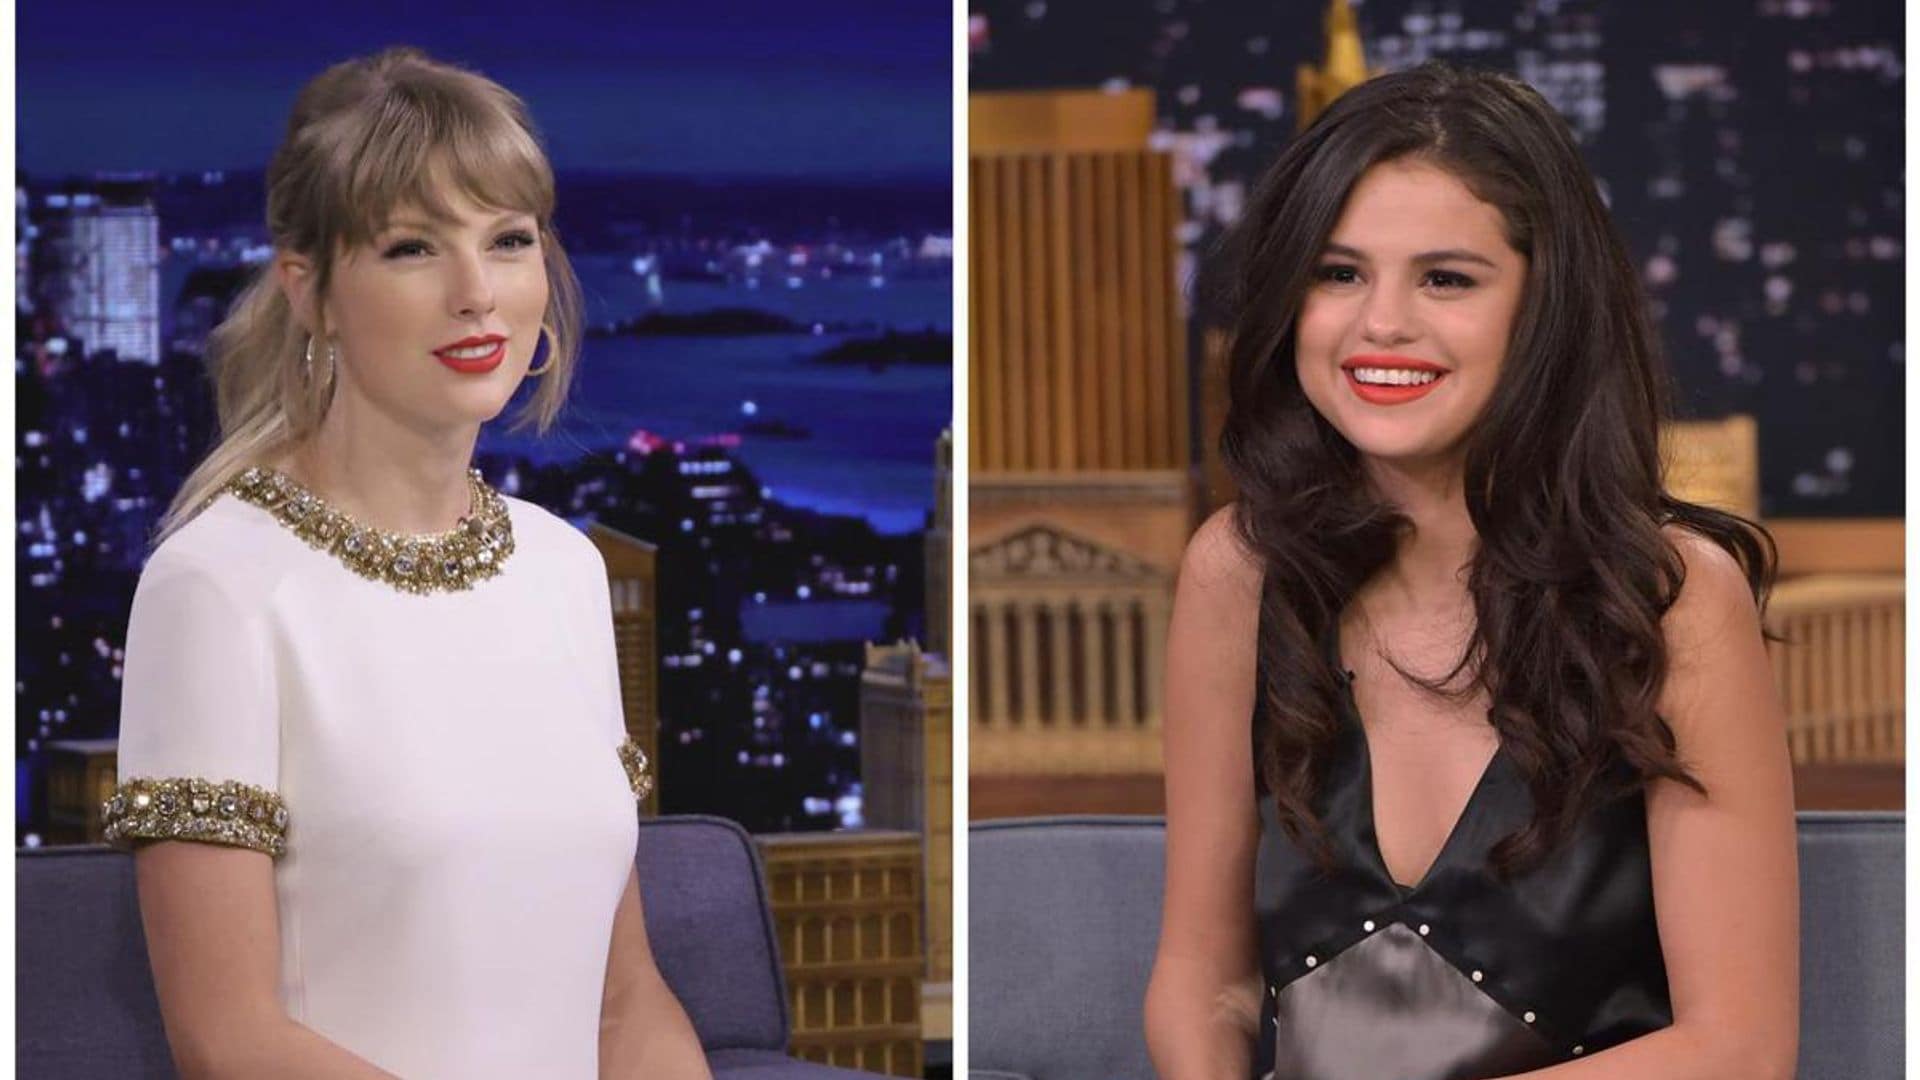 Taylor Swift and Selena Gomez are set to appear on The Tonight Show, Starring Jimmy Fallon.